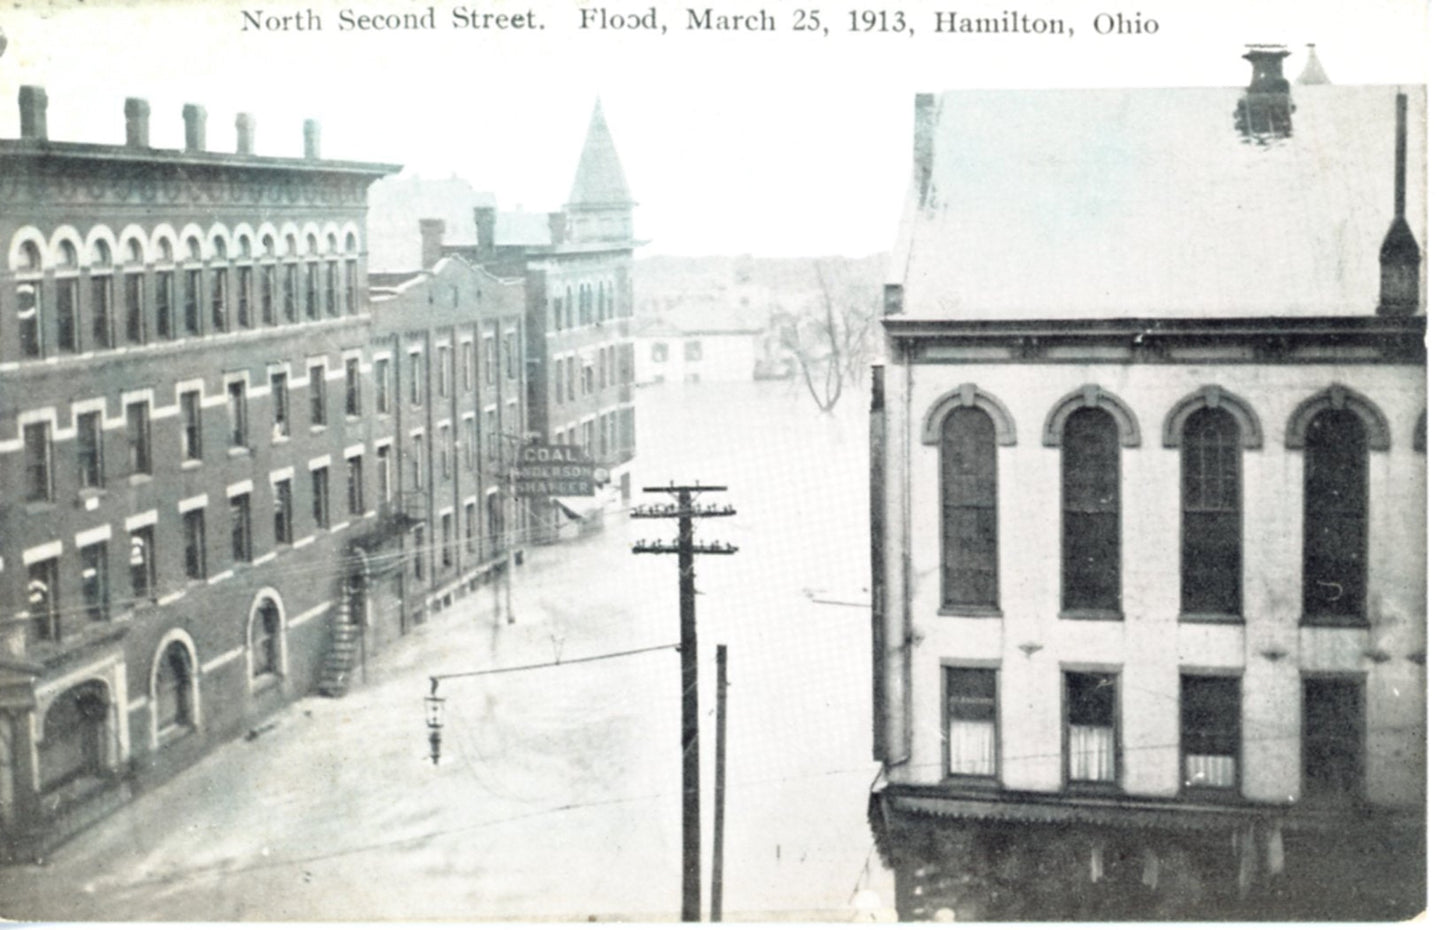 Flood Waters North Second Street Great Flood Disaster March 25, 1913 HAMILTON OHIO Antique Real Photo Postcard